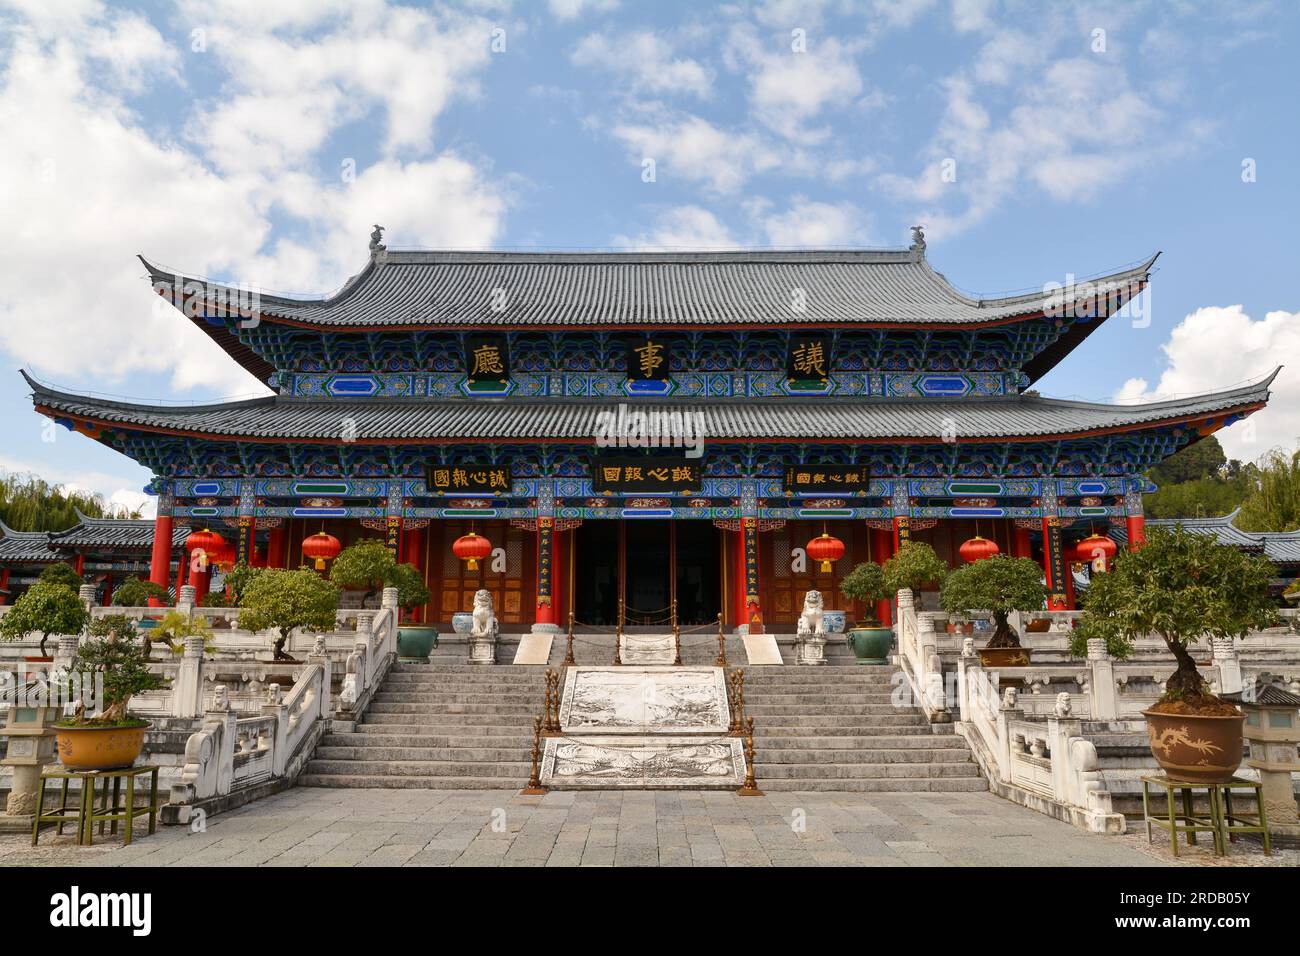 Beautiful ornate architecture inside the Mu residence in Lijiang, China. A Qing dynasty government building. November 2019 Stock Photo